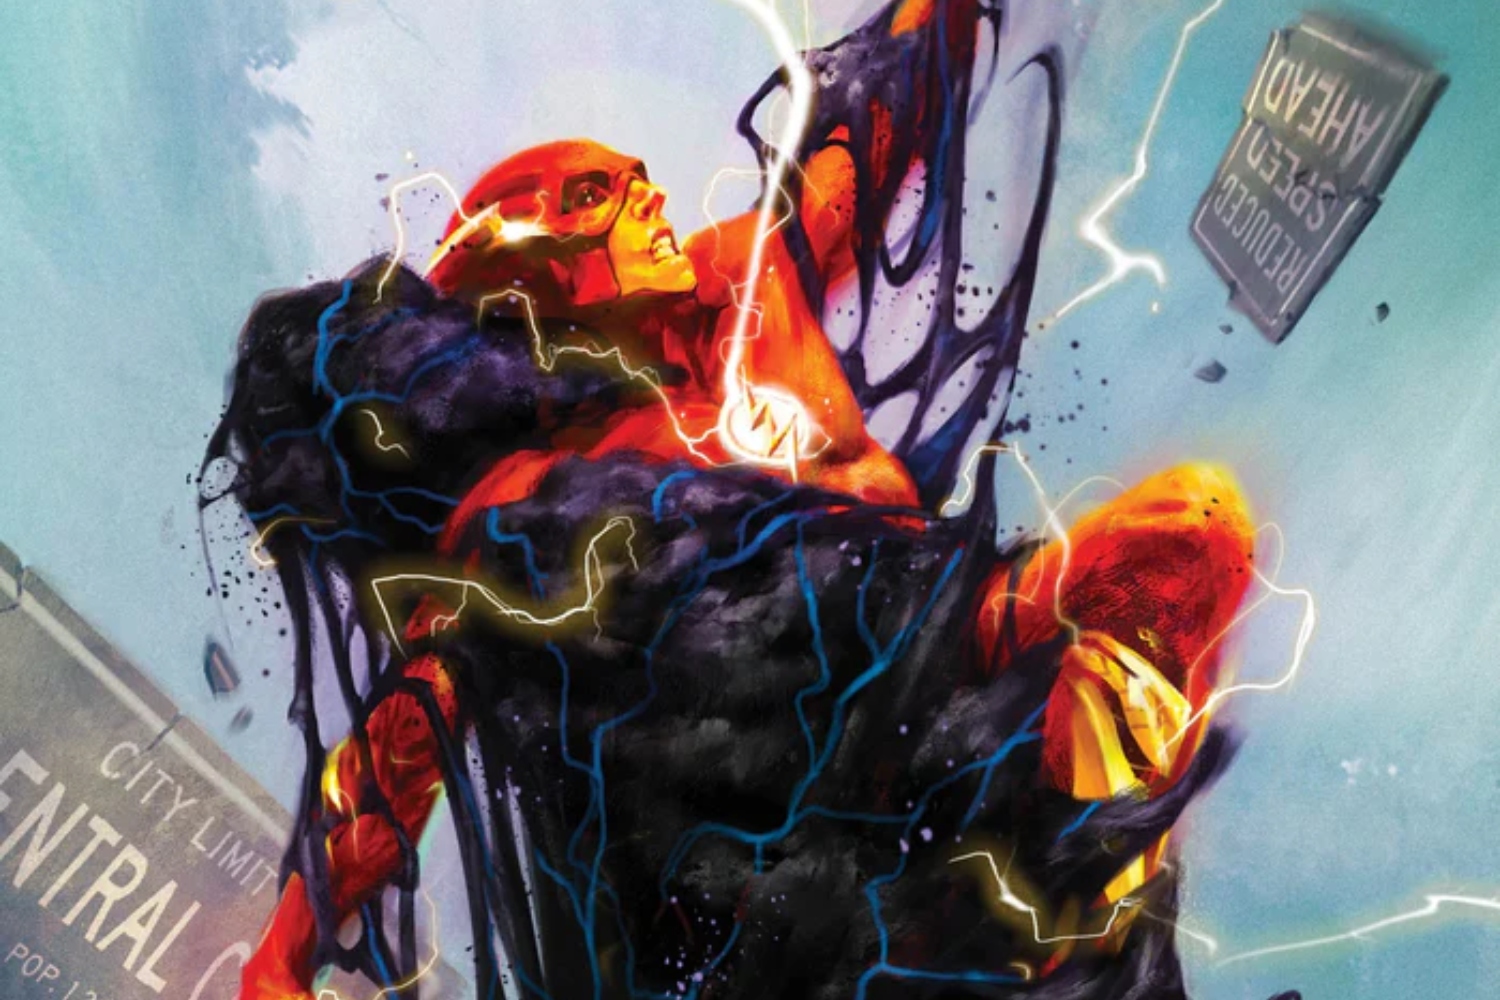 'The Flash: The Fastest Man Alive' #2 lags in reaching its narrative potential